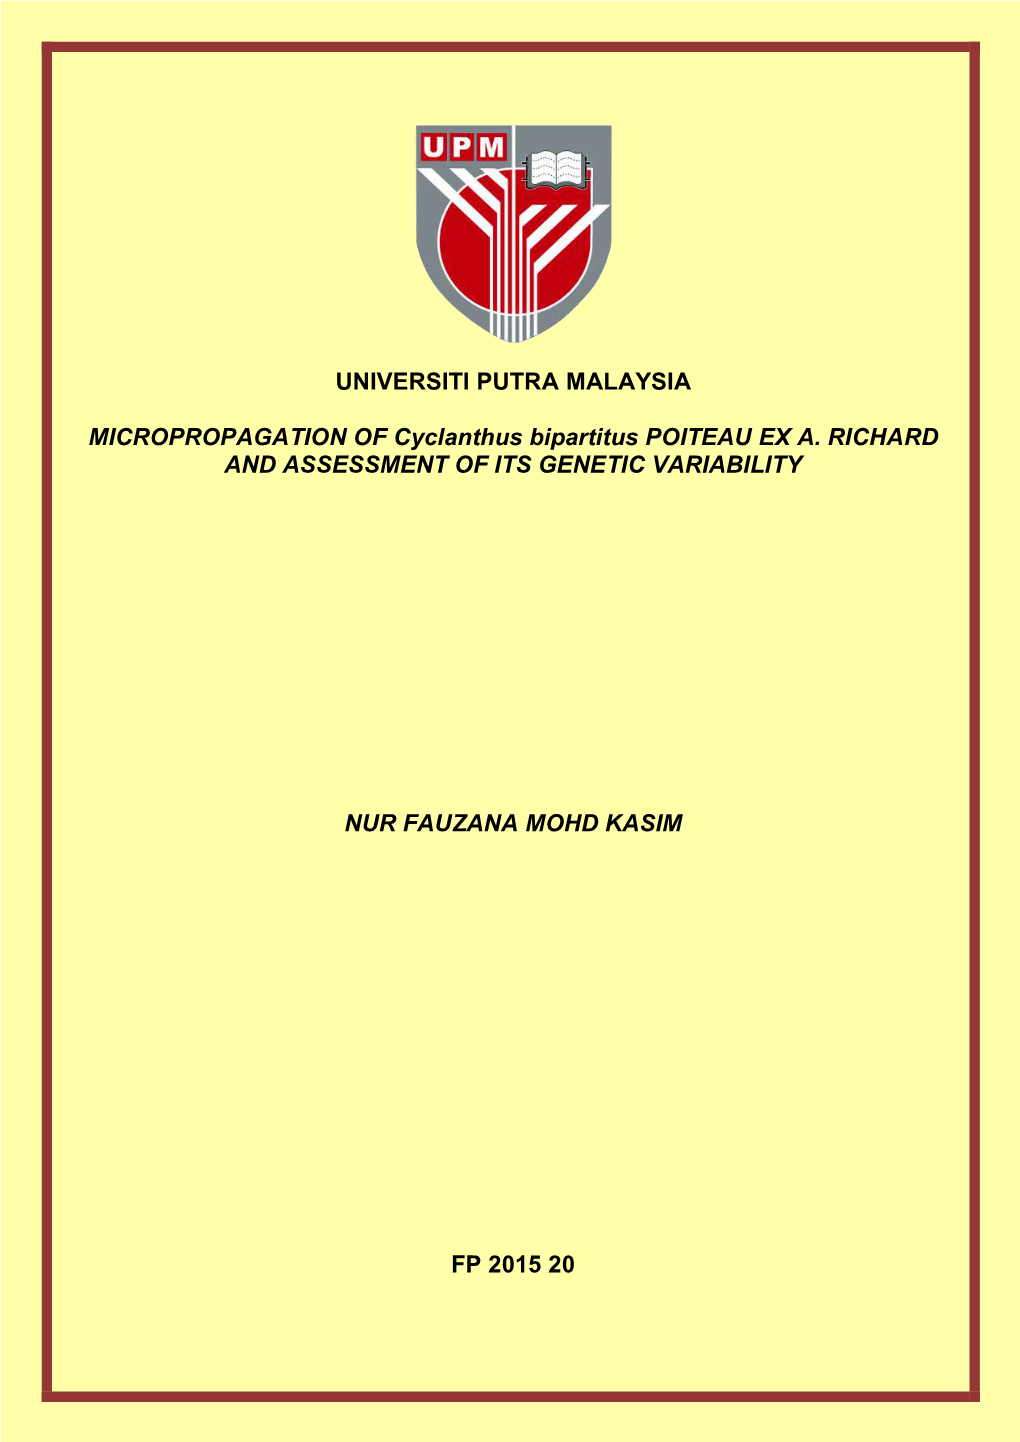 UNIVERSITI PUTRA MALAYSIA MICROPROPAGATION of Cyclanthus Bipartitus POITEAU EX A. RICHARD and ASSESSMENT of ITS GENETIC VARIABIL